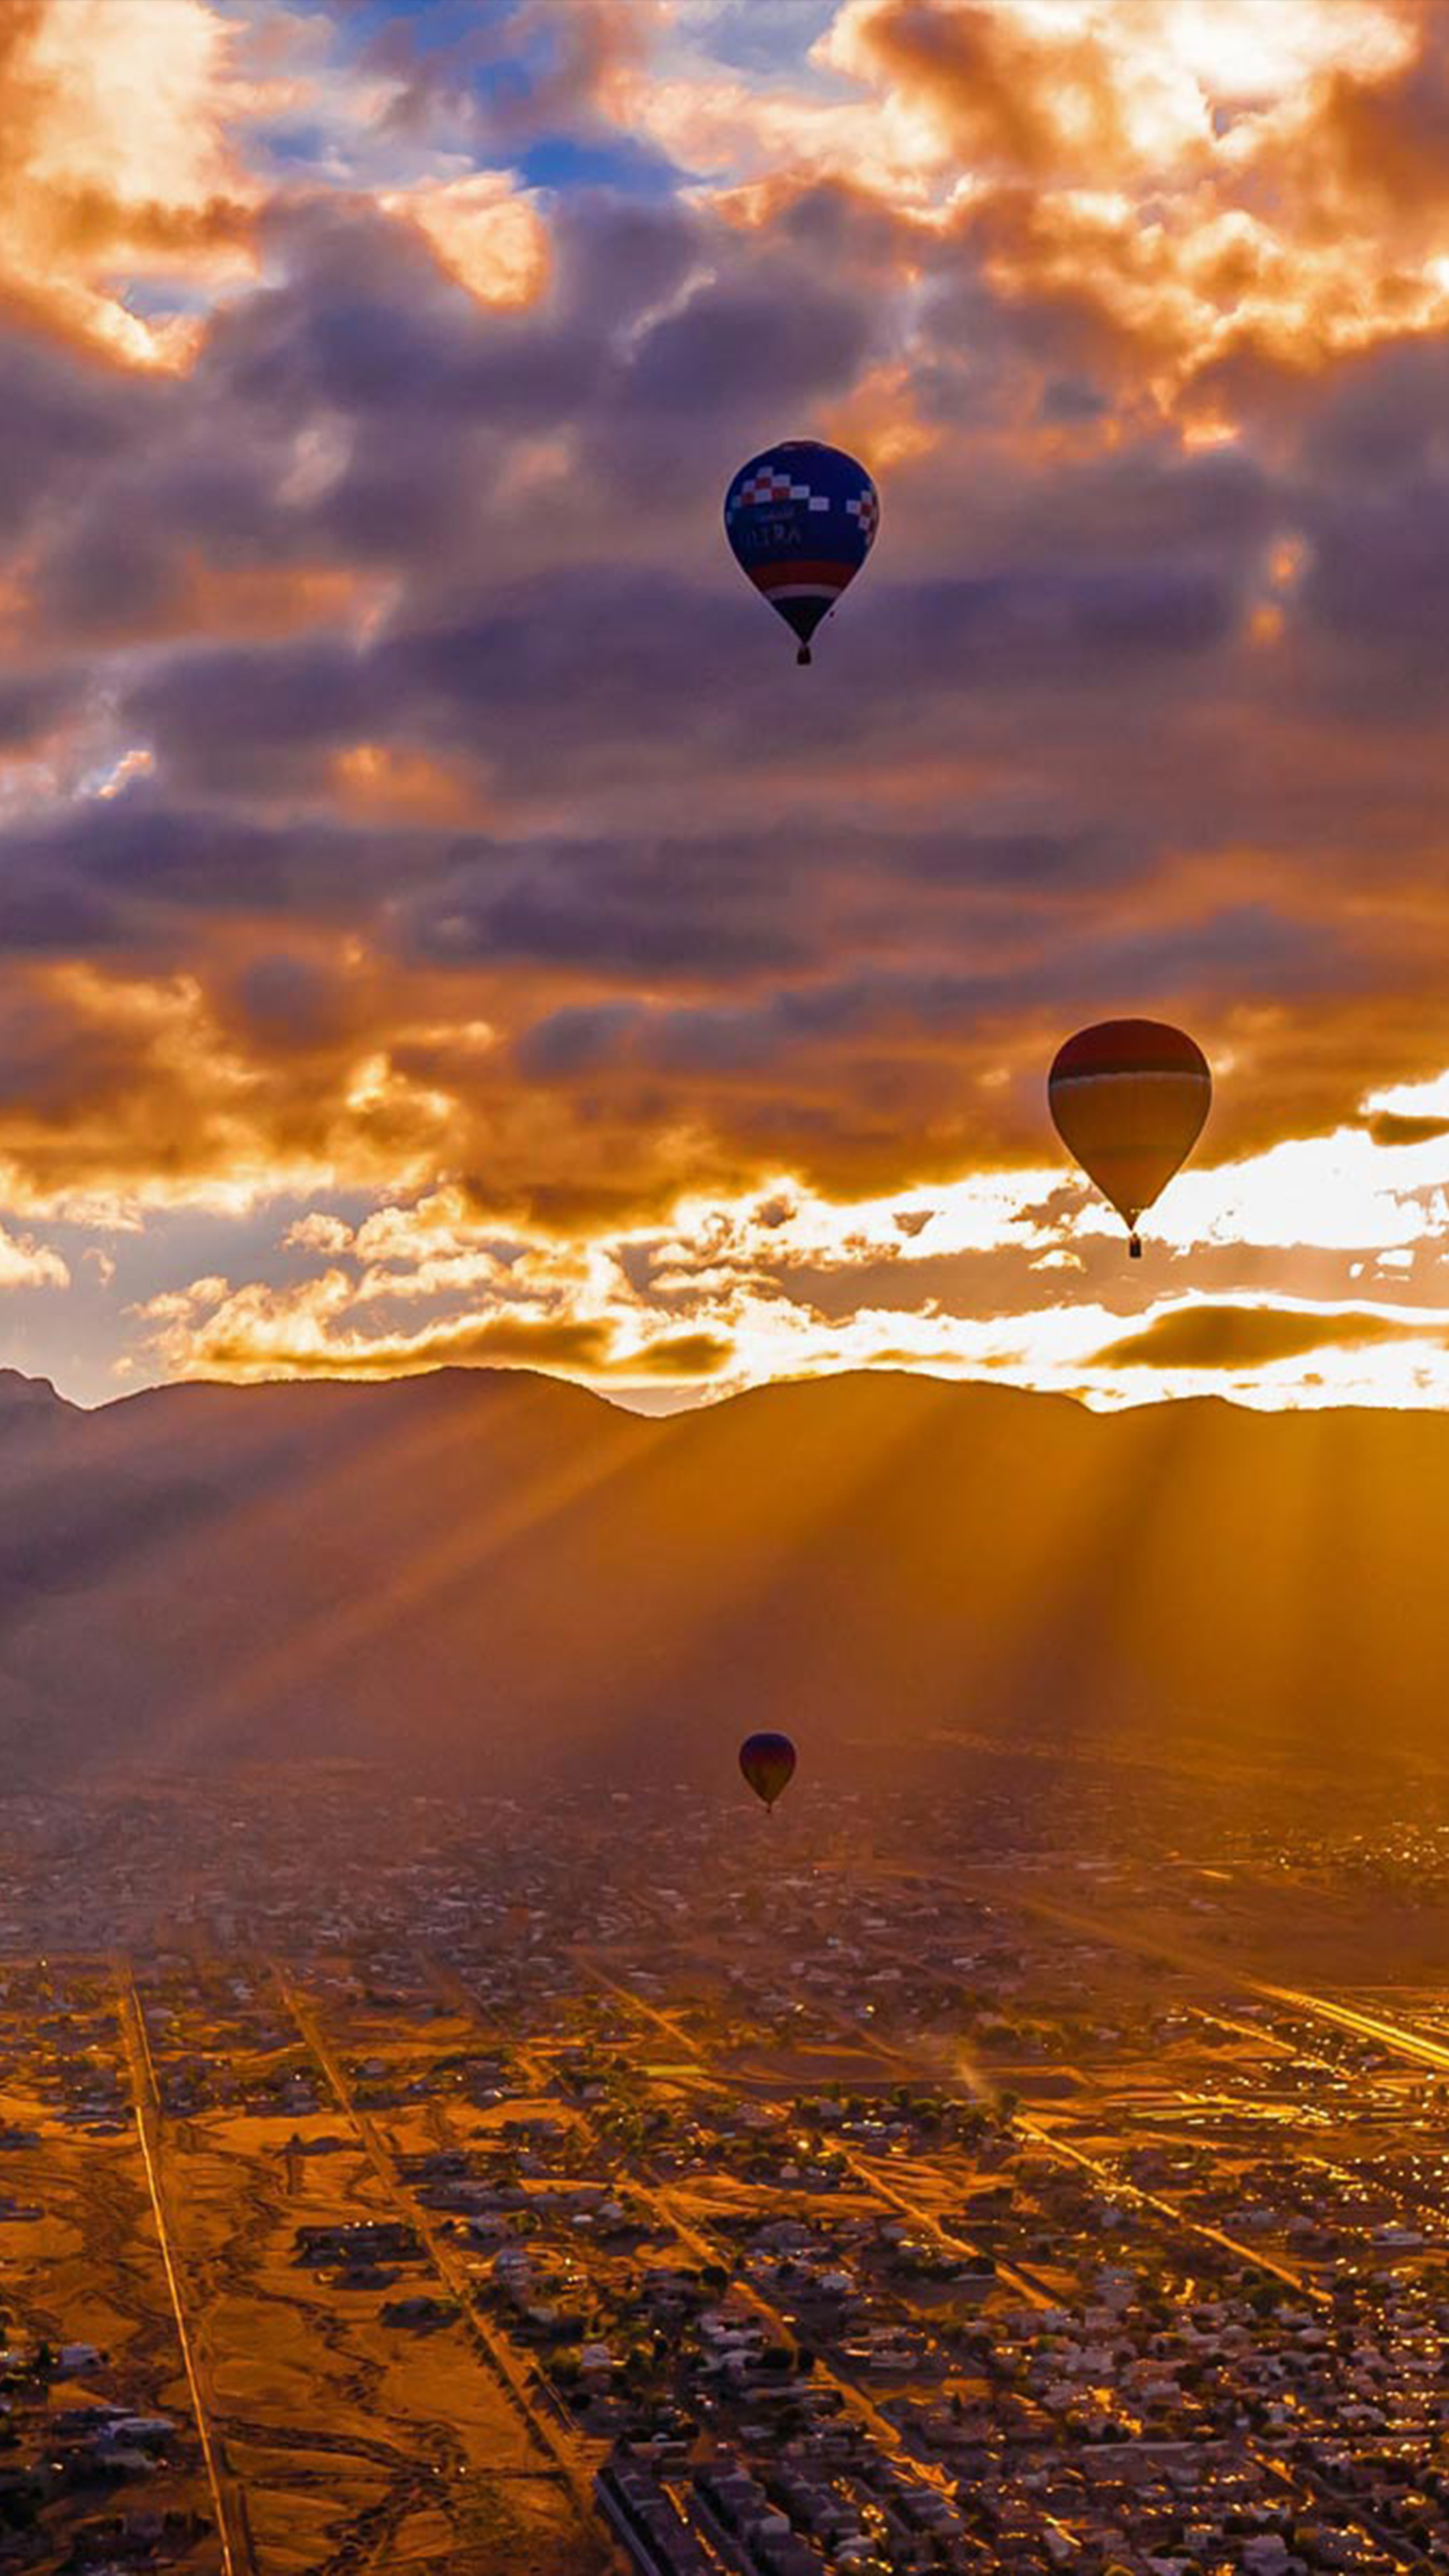 Air Sports: Balloons Festival, Floating vehicles up to the sky around the city surrounded by mountains in the sunset. 2160x3840 4K Wallpaper.